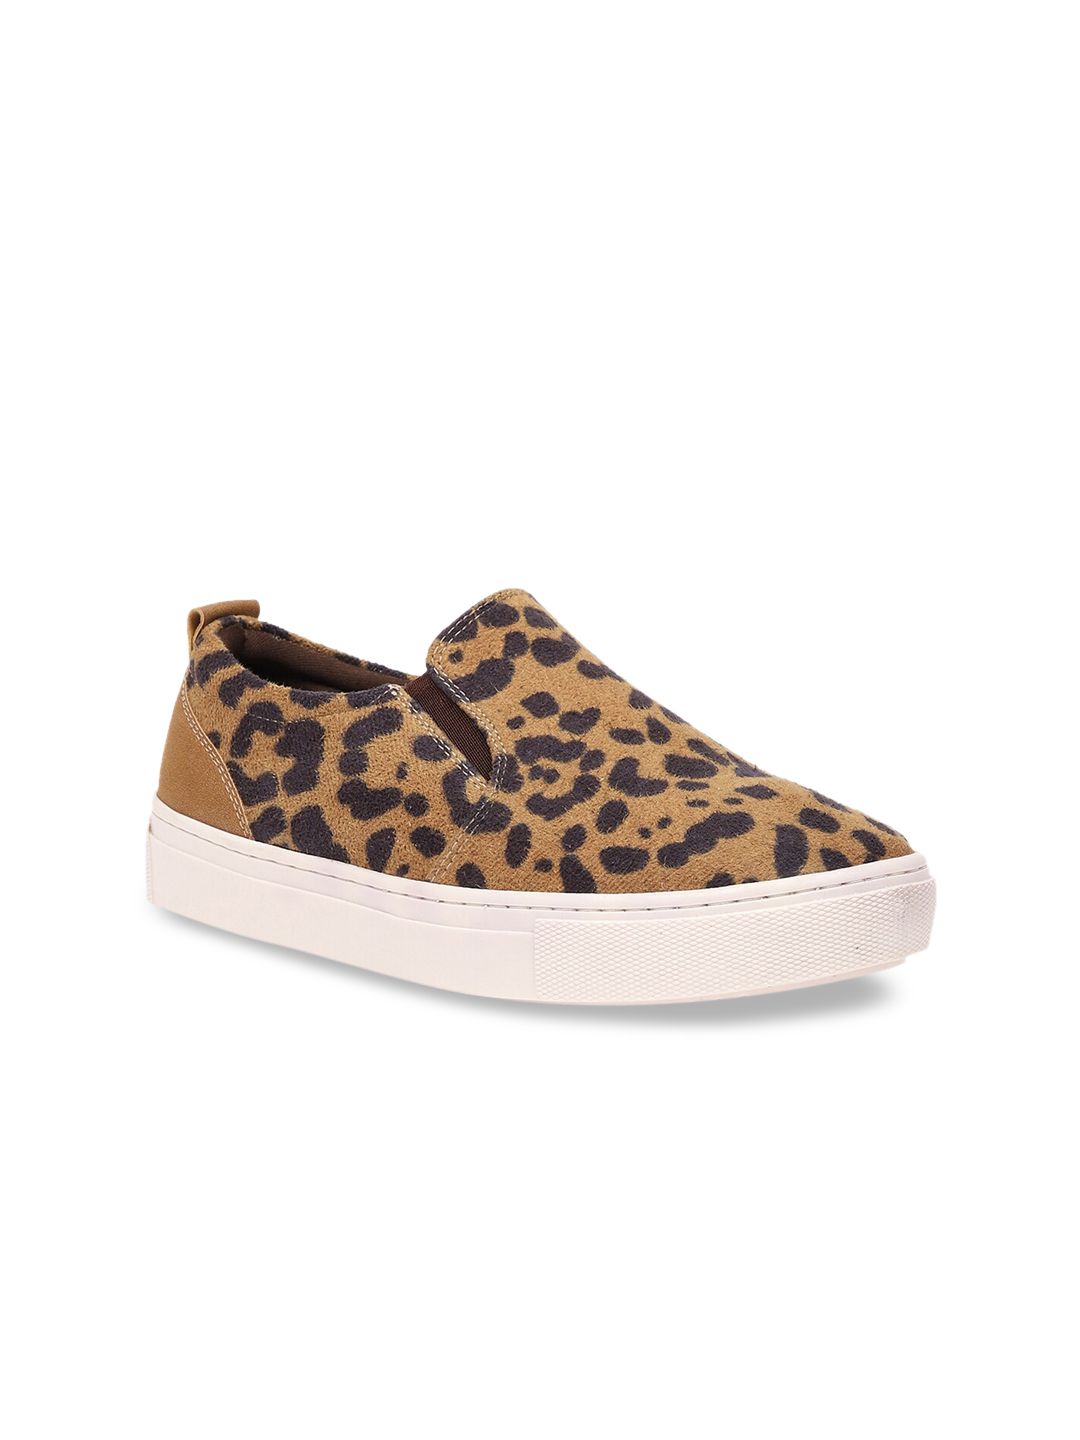 FOREVER 21 Women Brown Printed PU Slip-On Sneakers Price in India